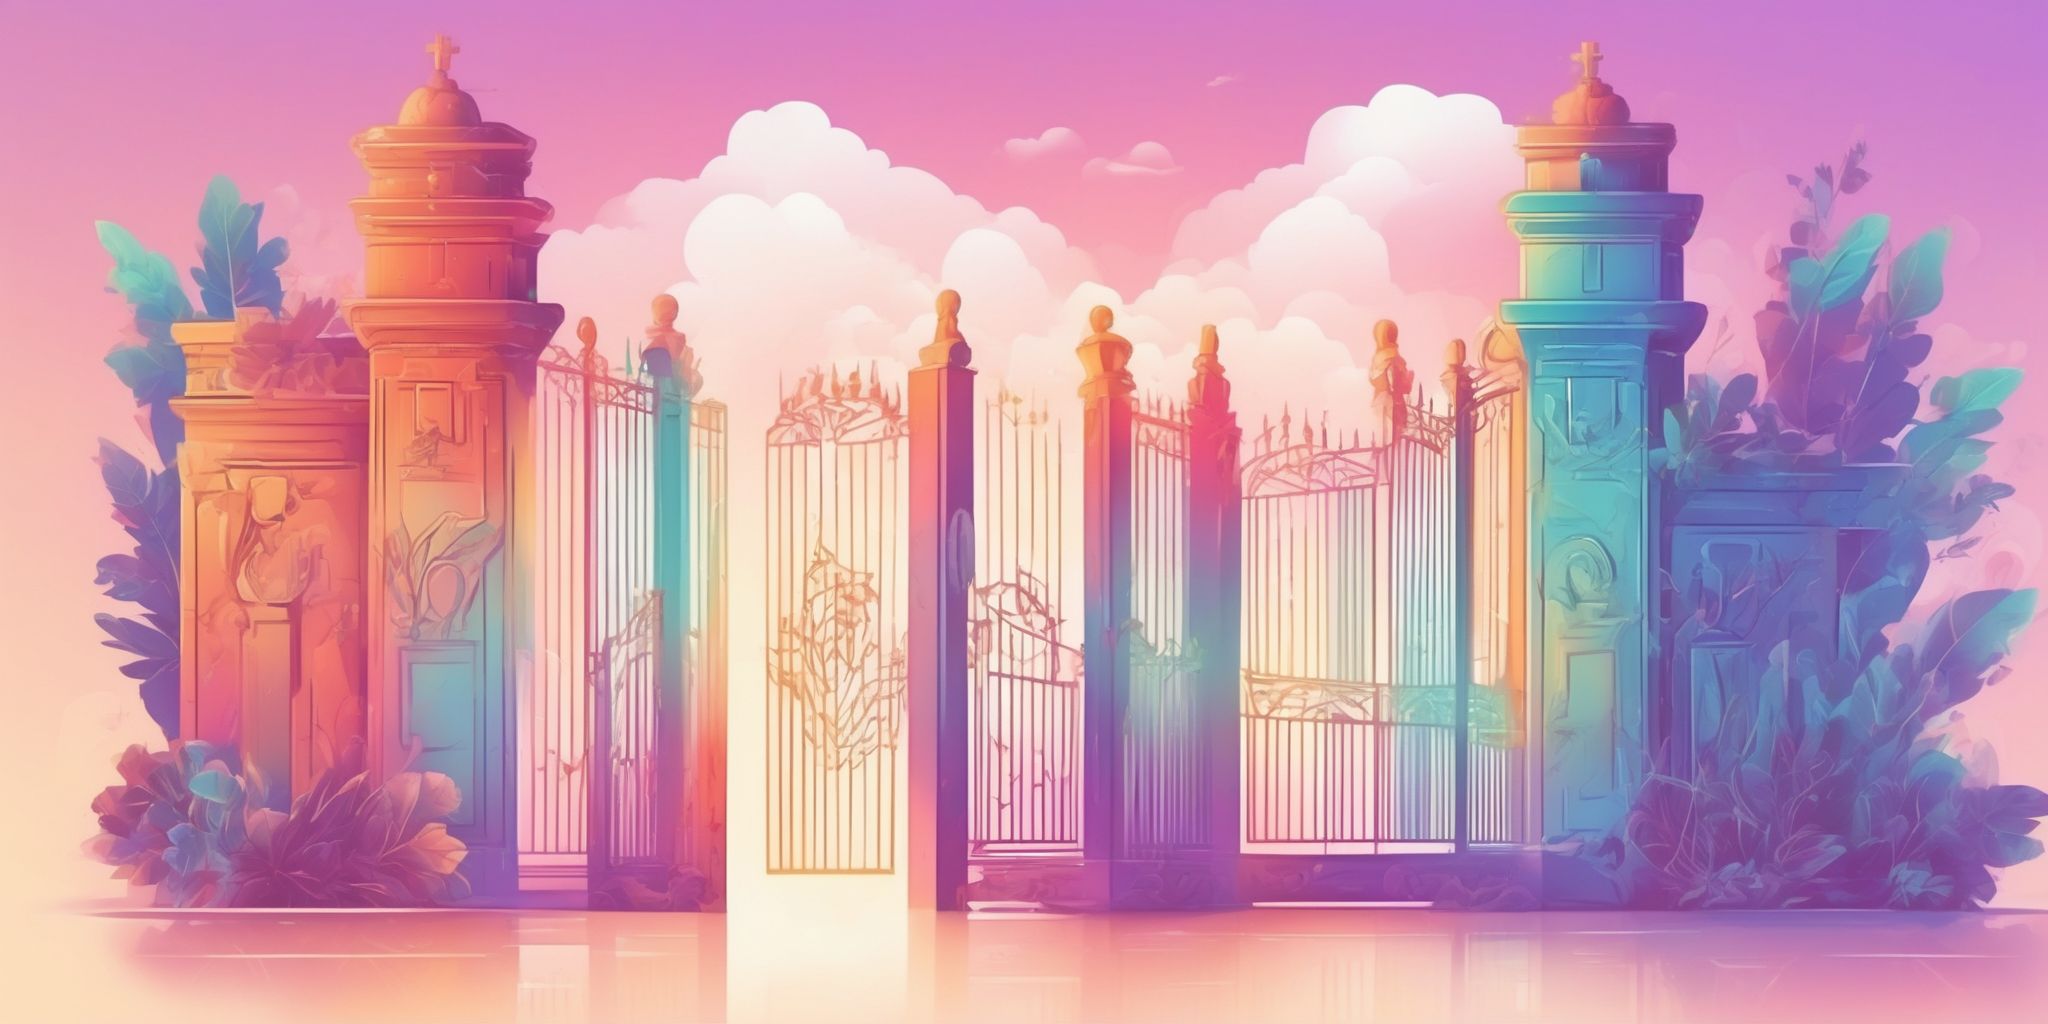 Hashtag gateway in illustration style with gradients and white background